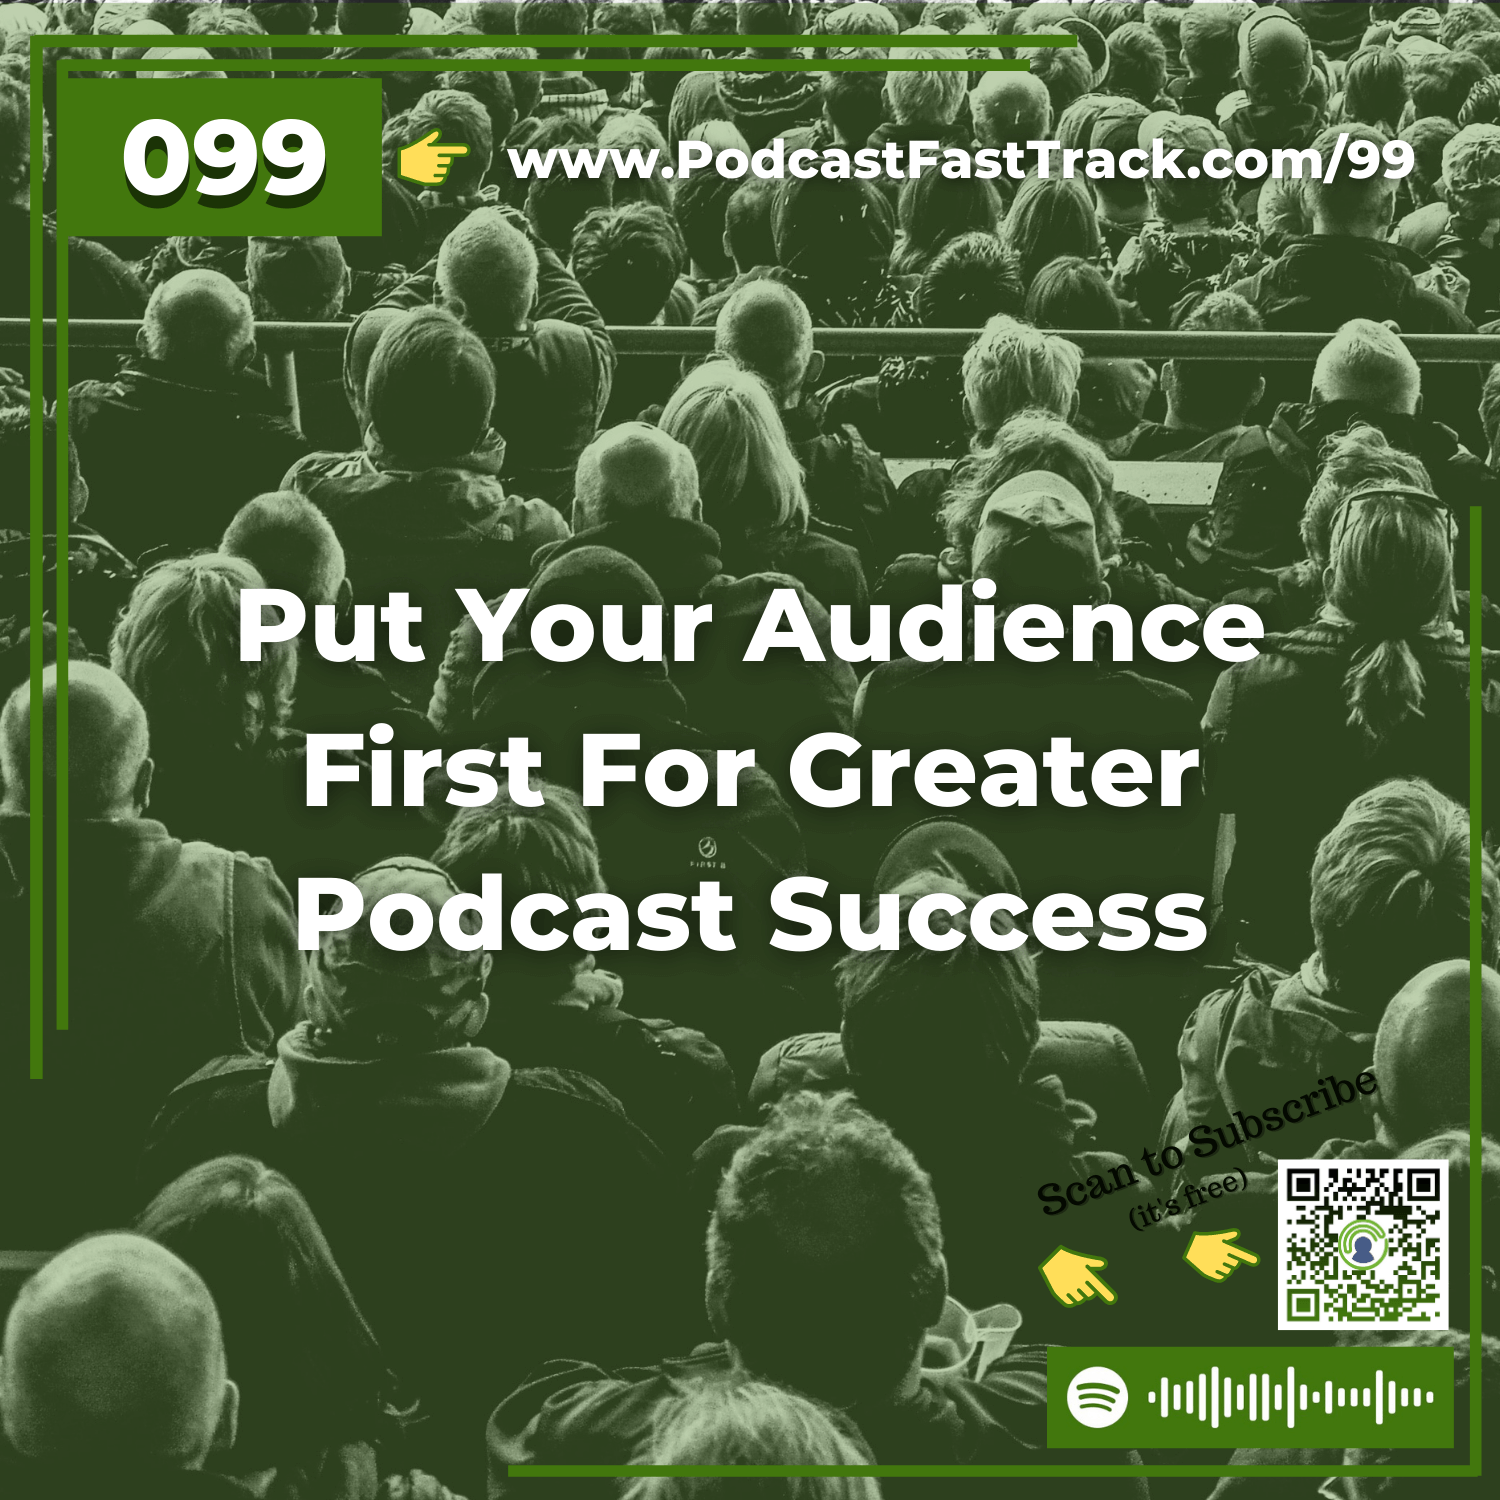 99: Put Your Audience First For Greater Podcast Success